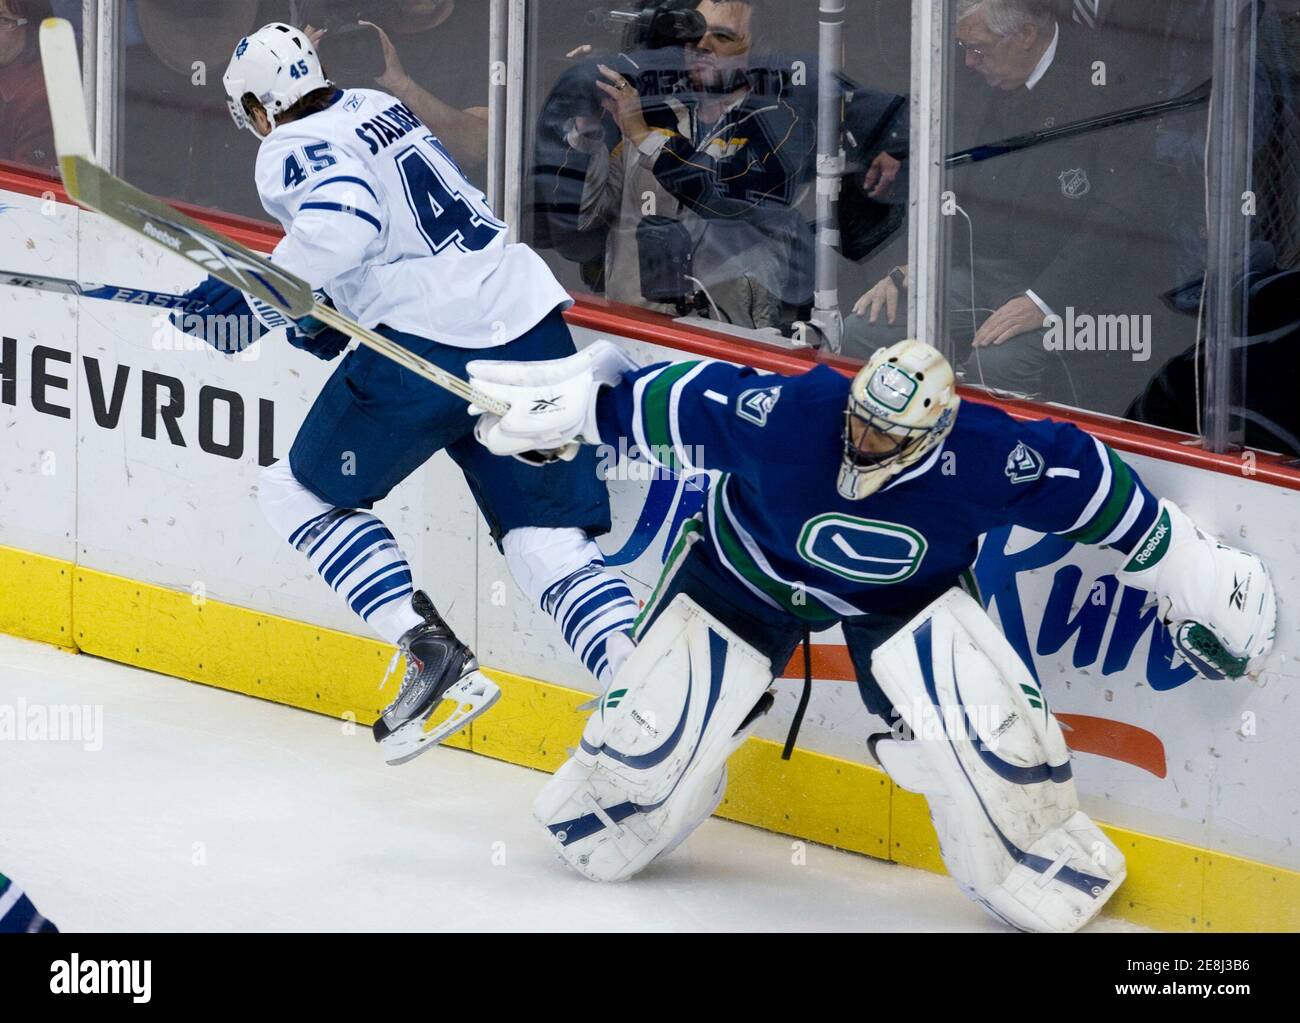 Toronto Maple Leafs' Viktor Stalberg (L) gets past Vancouver Canucks' goalie Roberto Luongo during first period NHL hockey in Vancouver, British Columbia October 24, 2009.         REUTERS/Andy Clark     (CANADA) Stock Photo